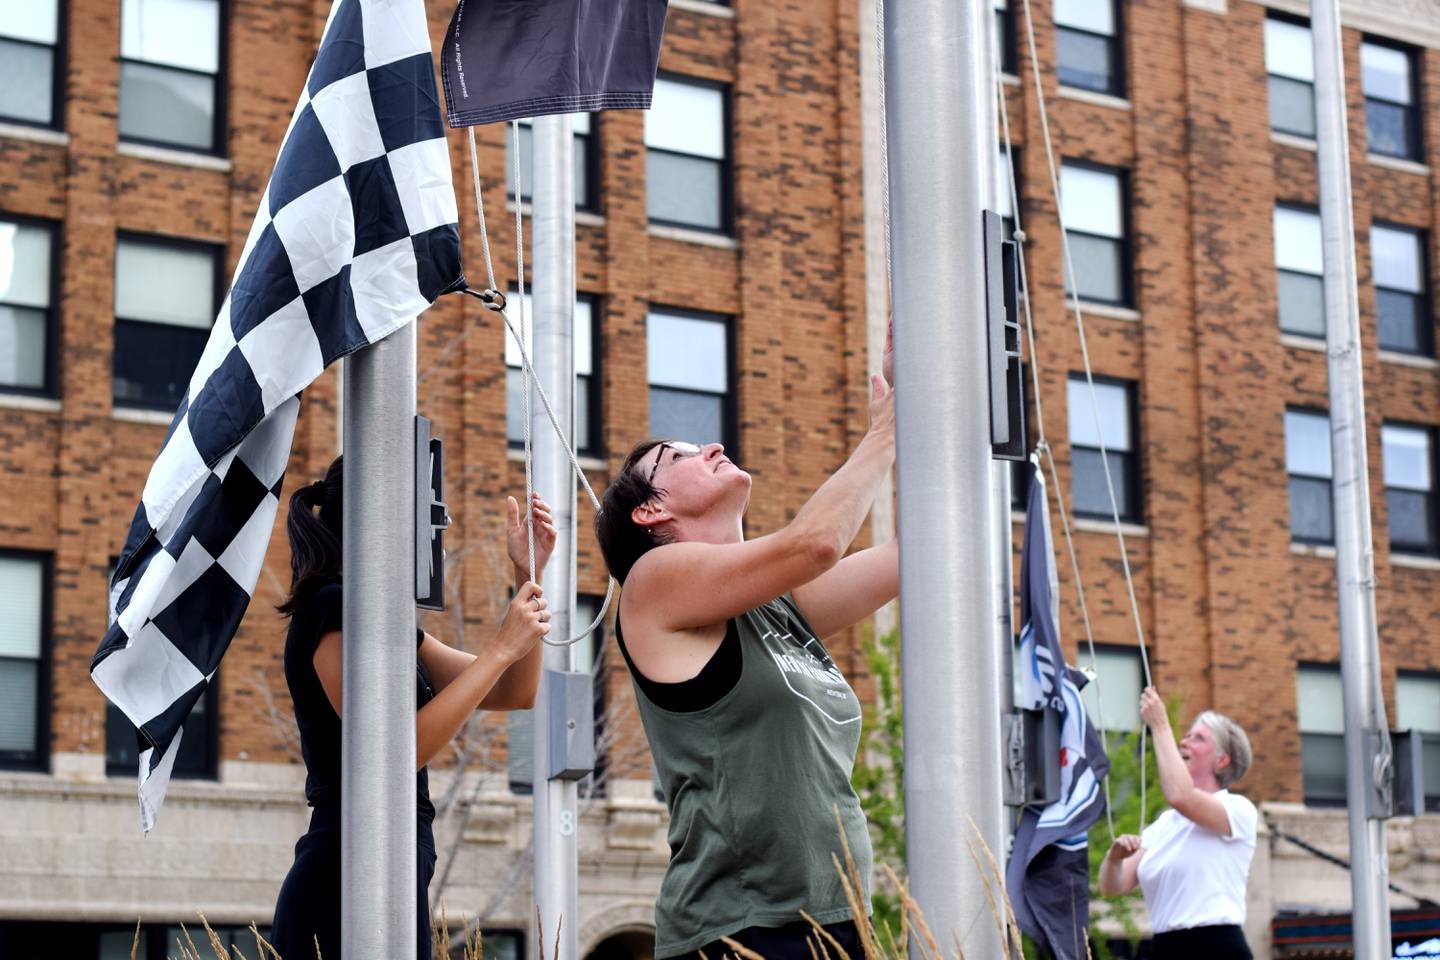 Erin Yeager, center, the executive director of Newton Main Street, prepares to hoist a flag to a post on June 25 in downtown Newton. She was joined by IndyCar representatives who helped place flags around the town square to commemorate the upcoming race weekend at Iowa Speedway.